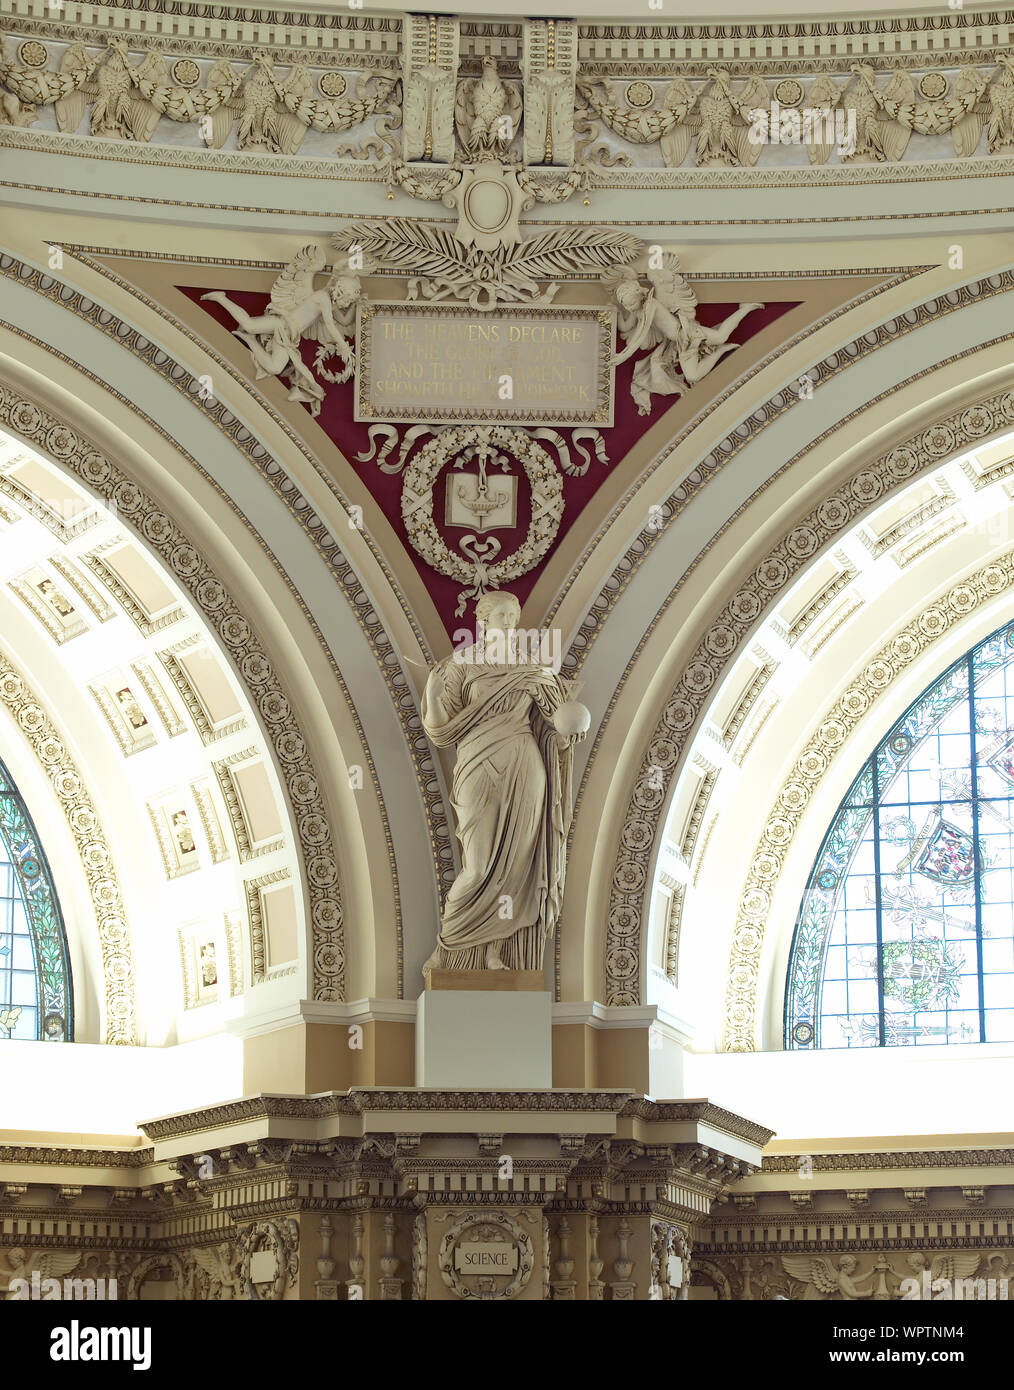 Main Reading Room View Of Statue Of Science By John